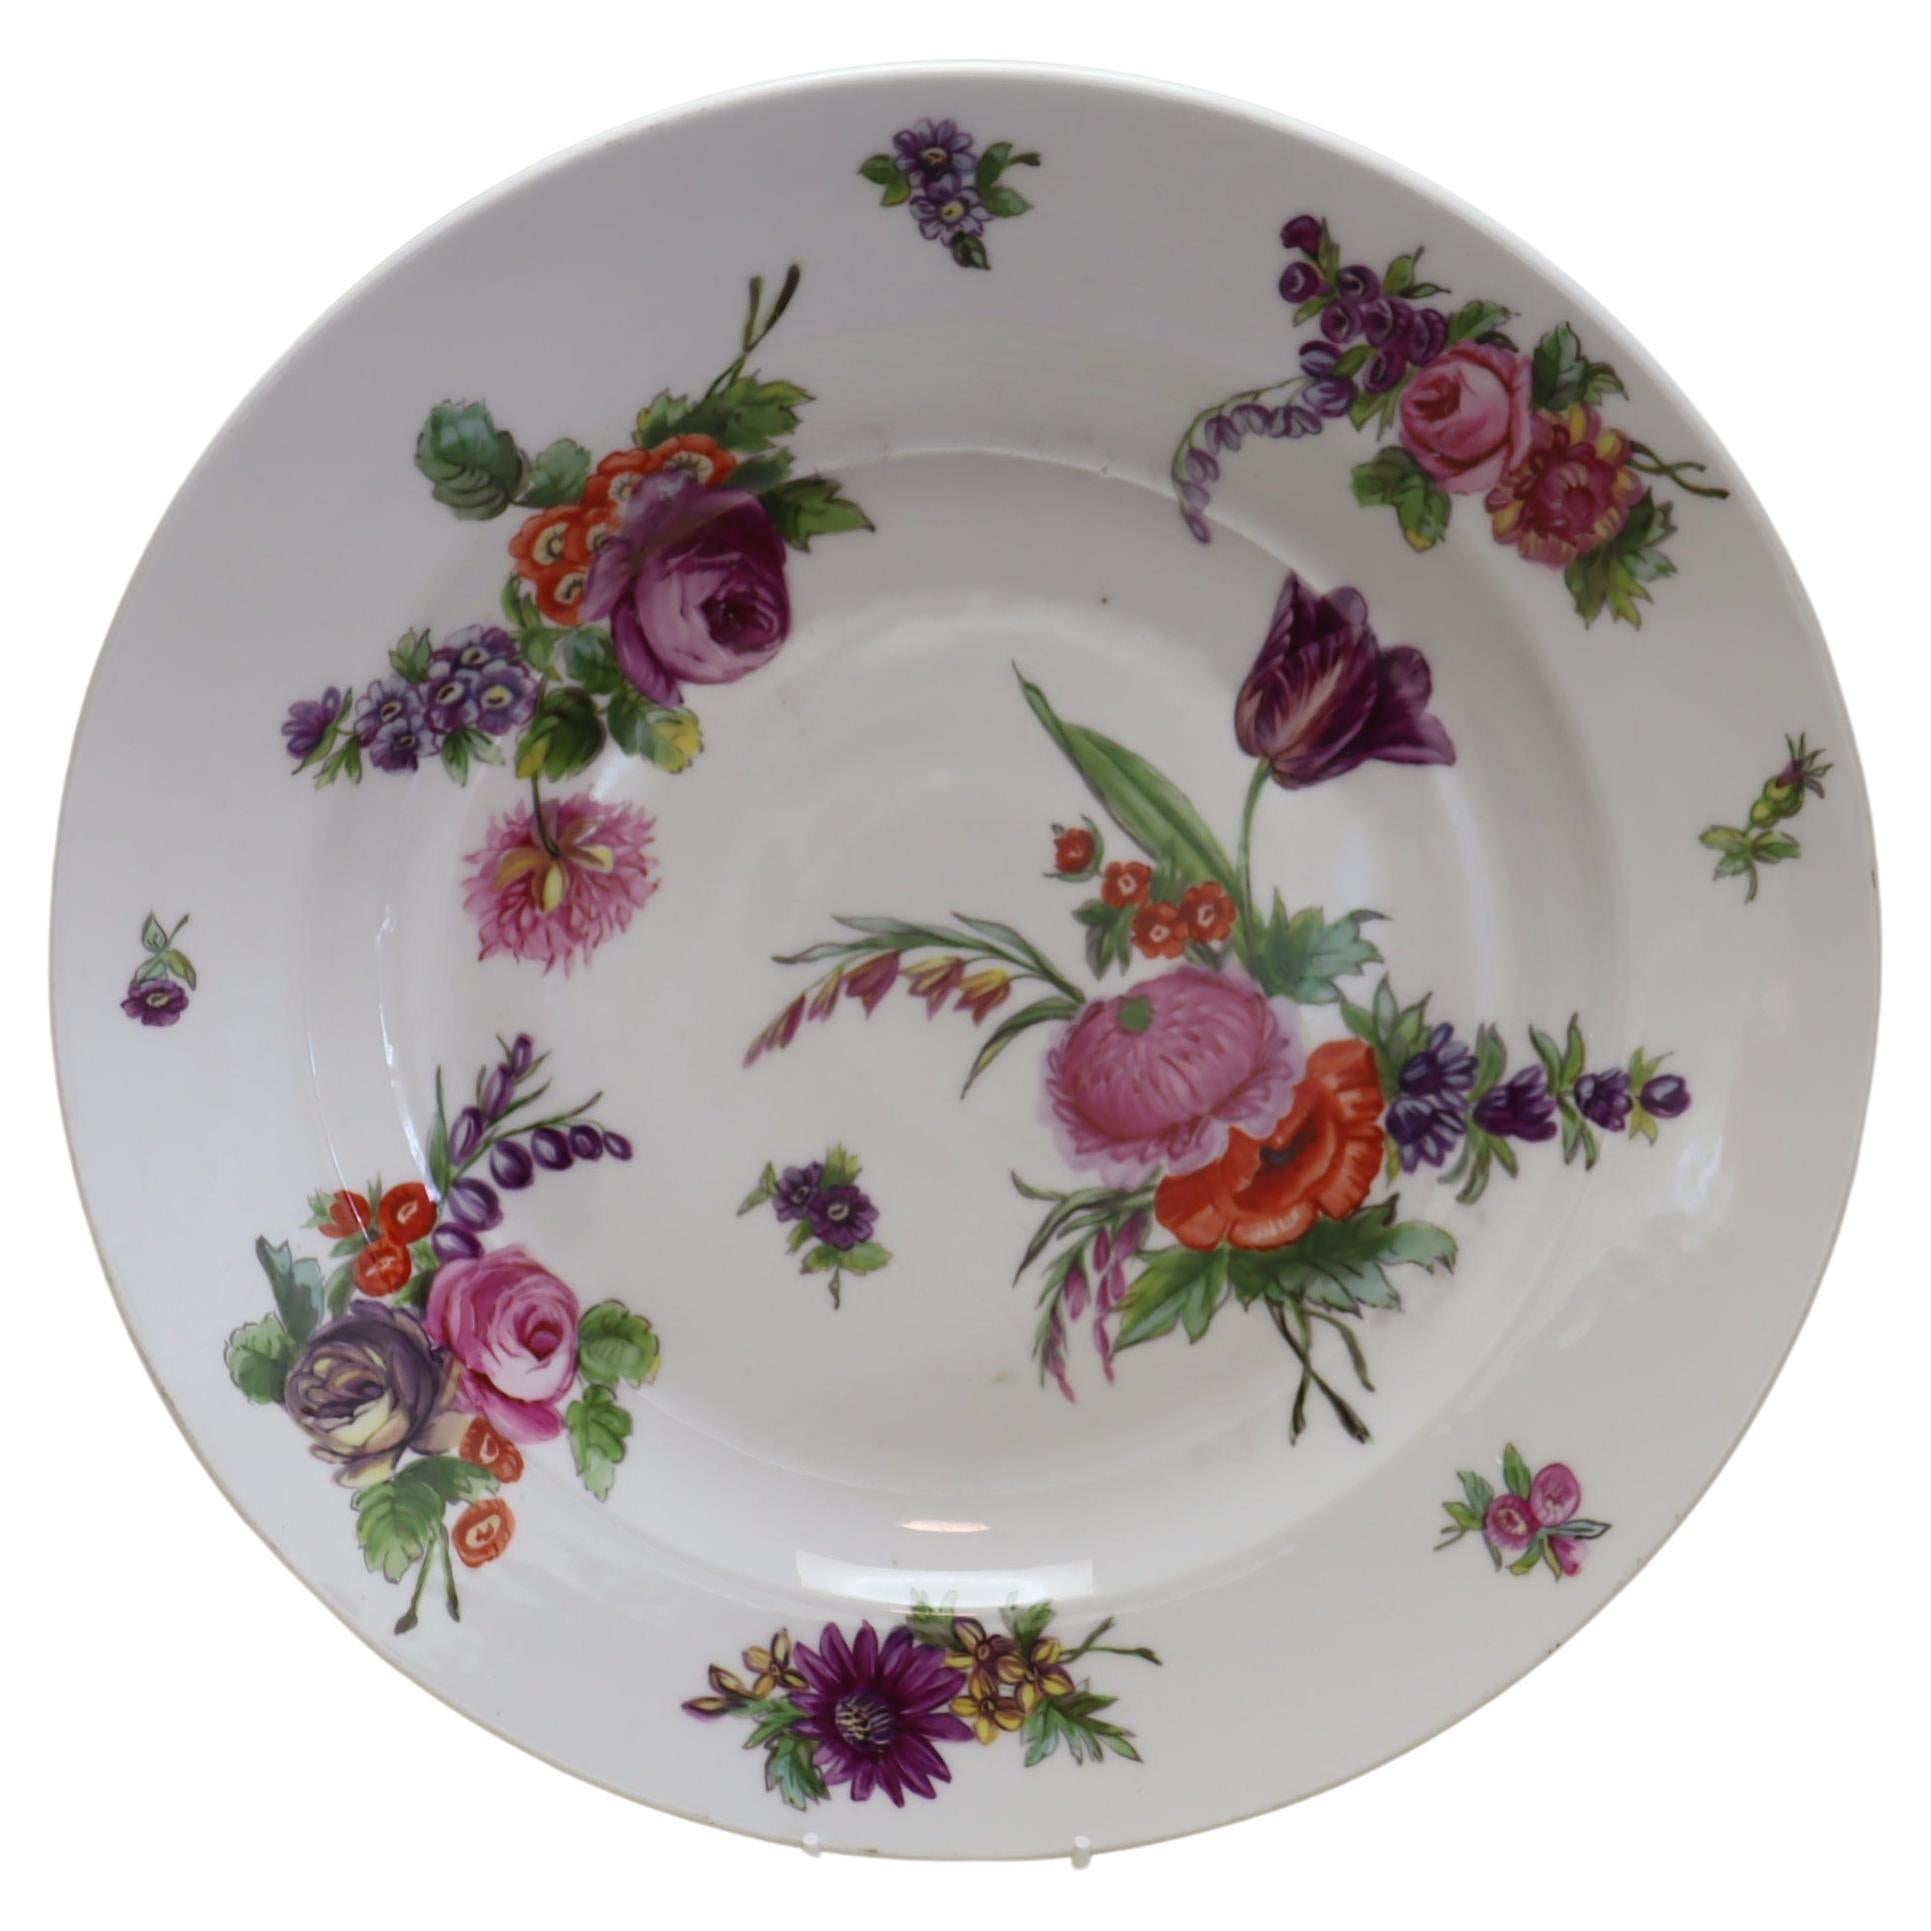 Large Hand Painted French Porcelain Platter